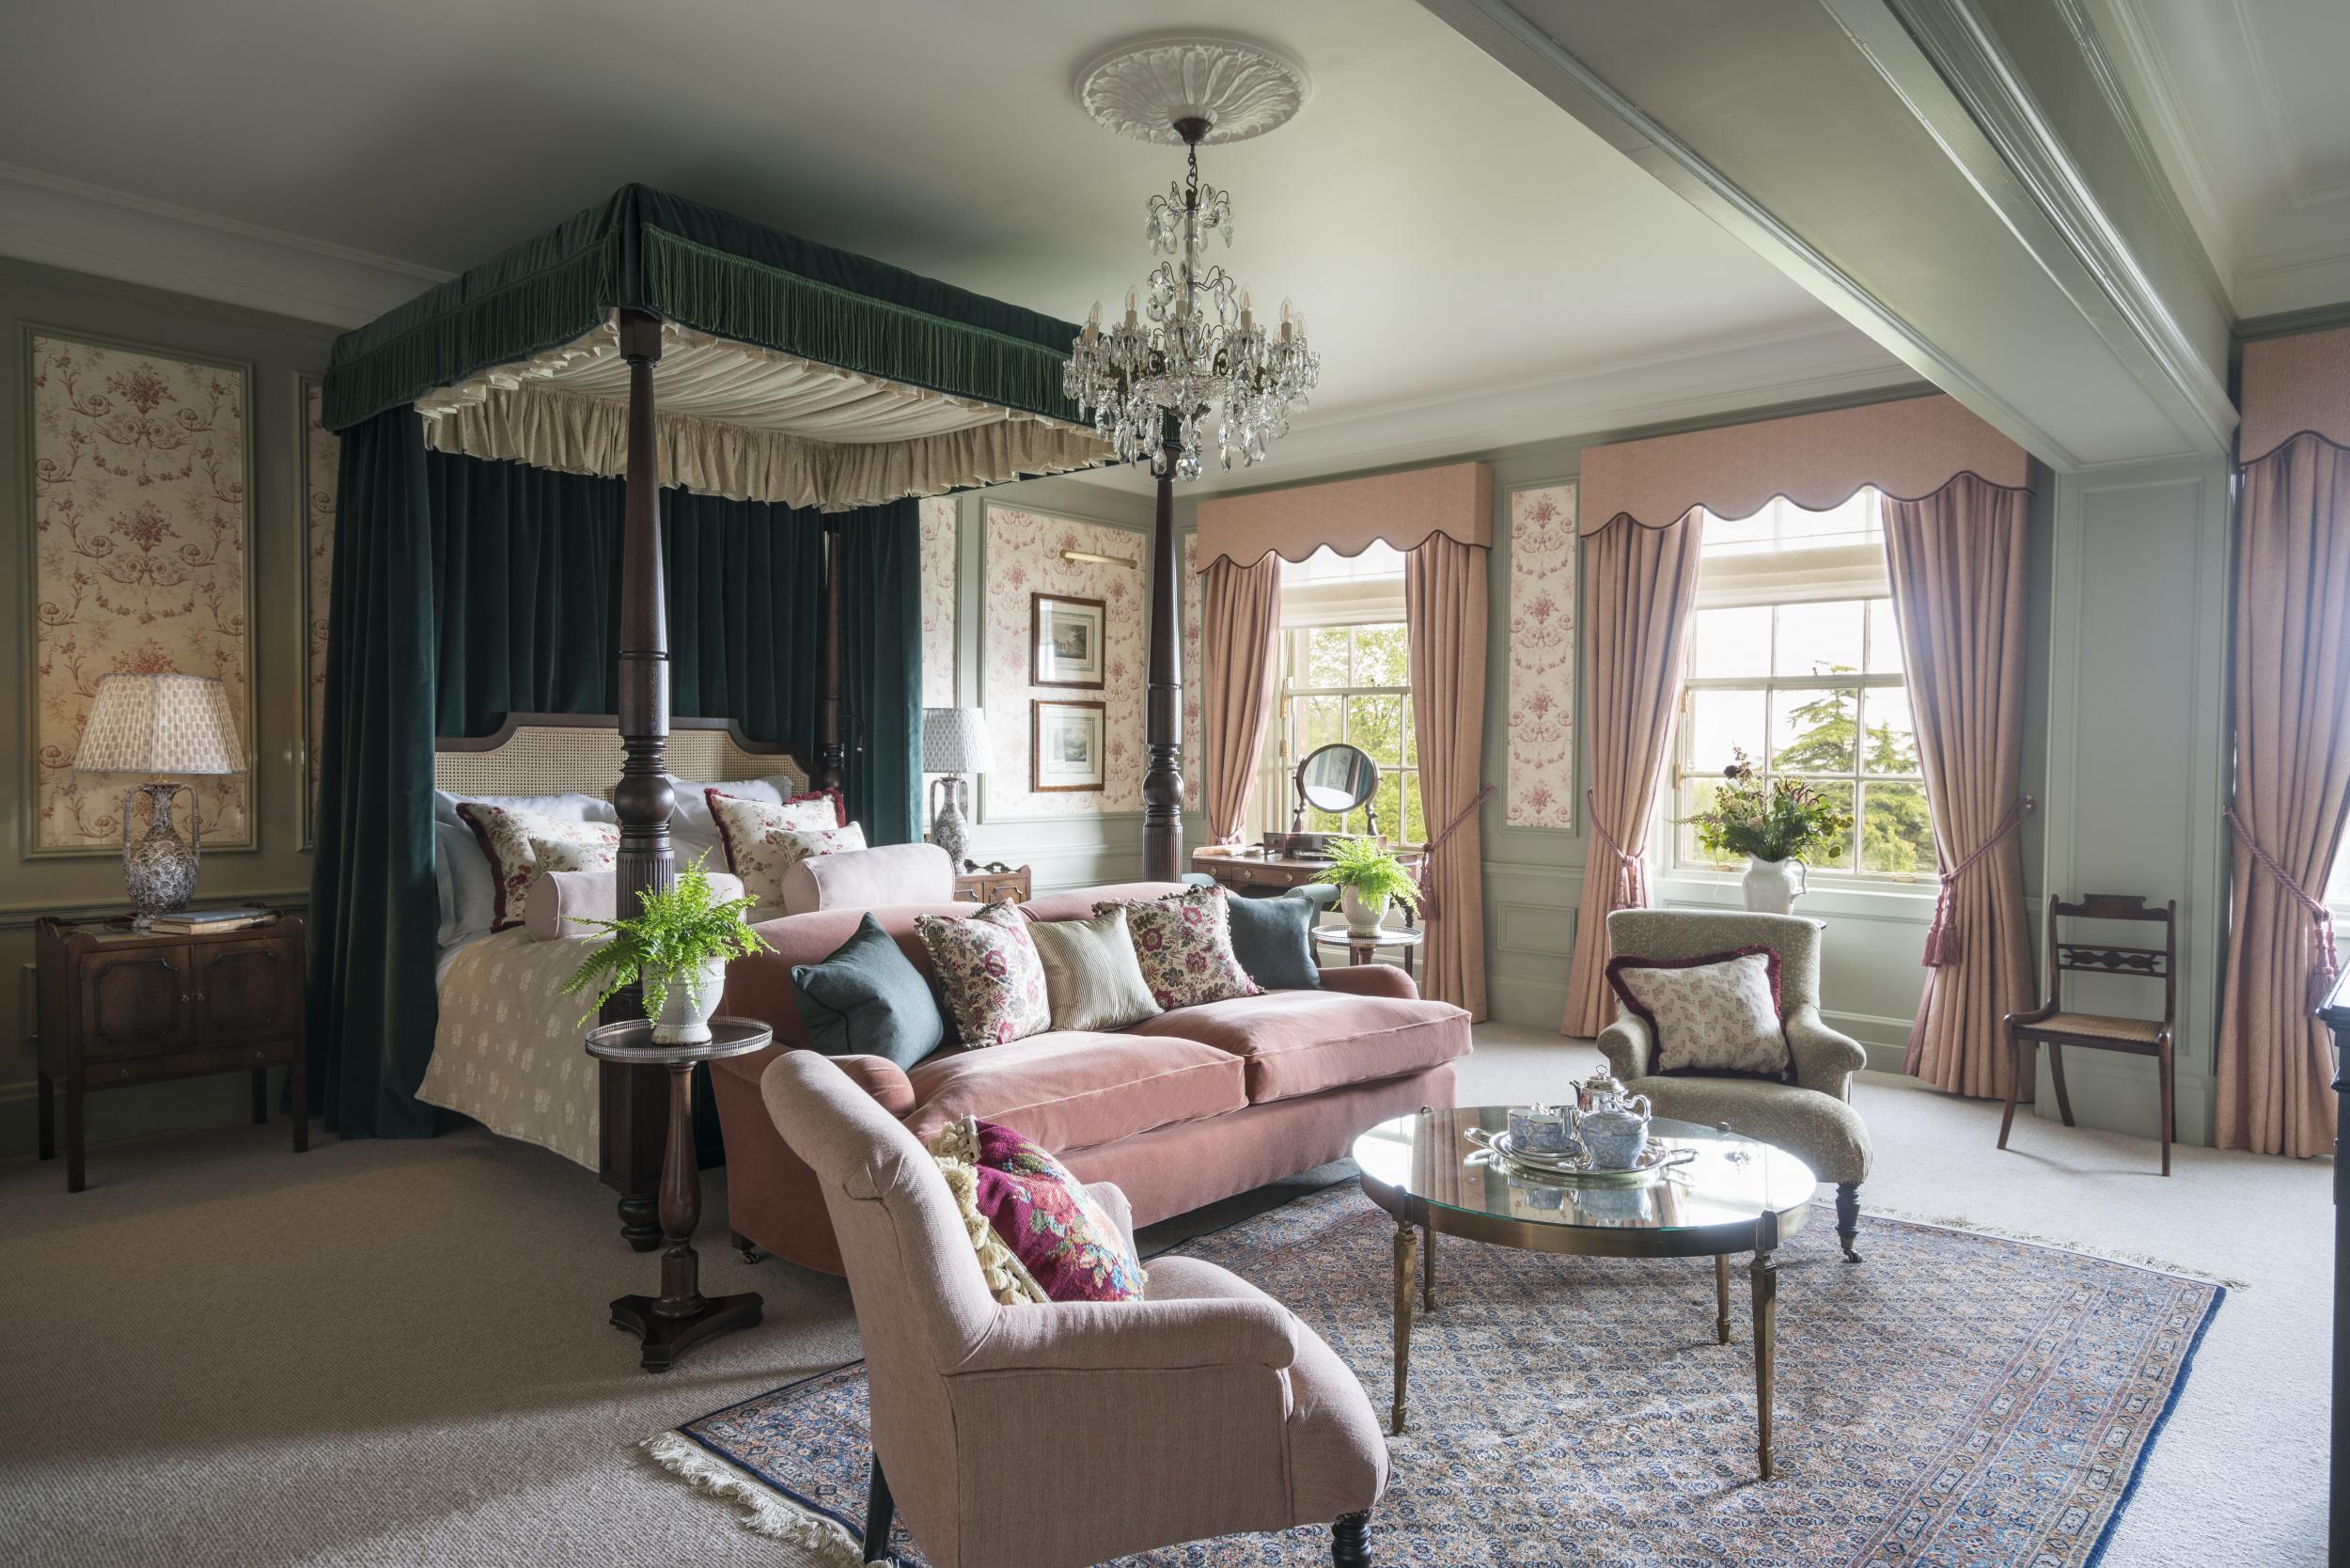 Gleneagles’ Royal Lochnagar Suite has a four-poster bed